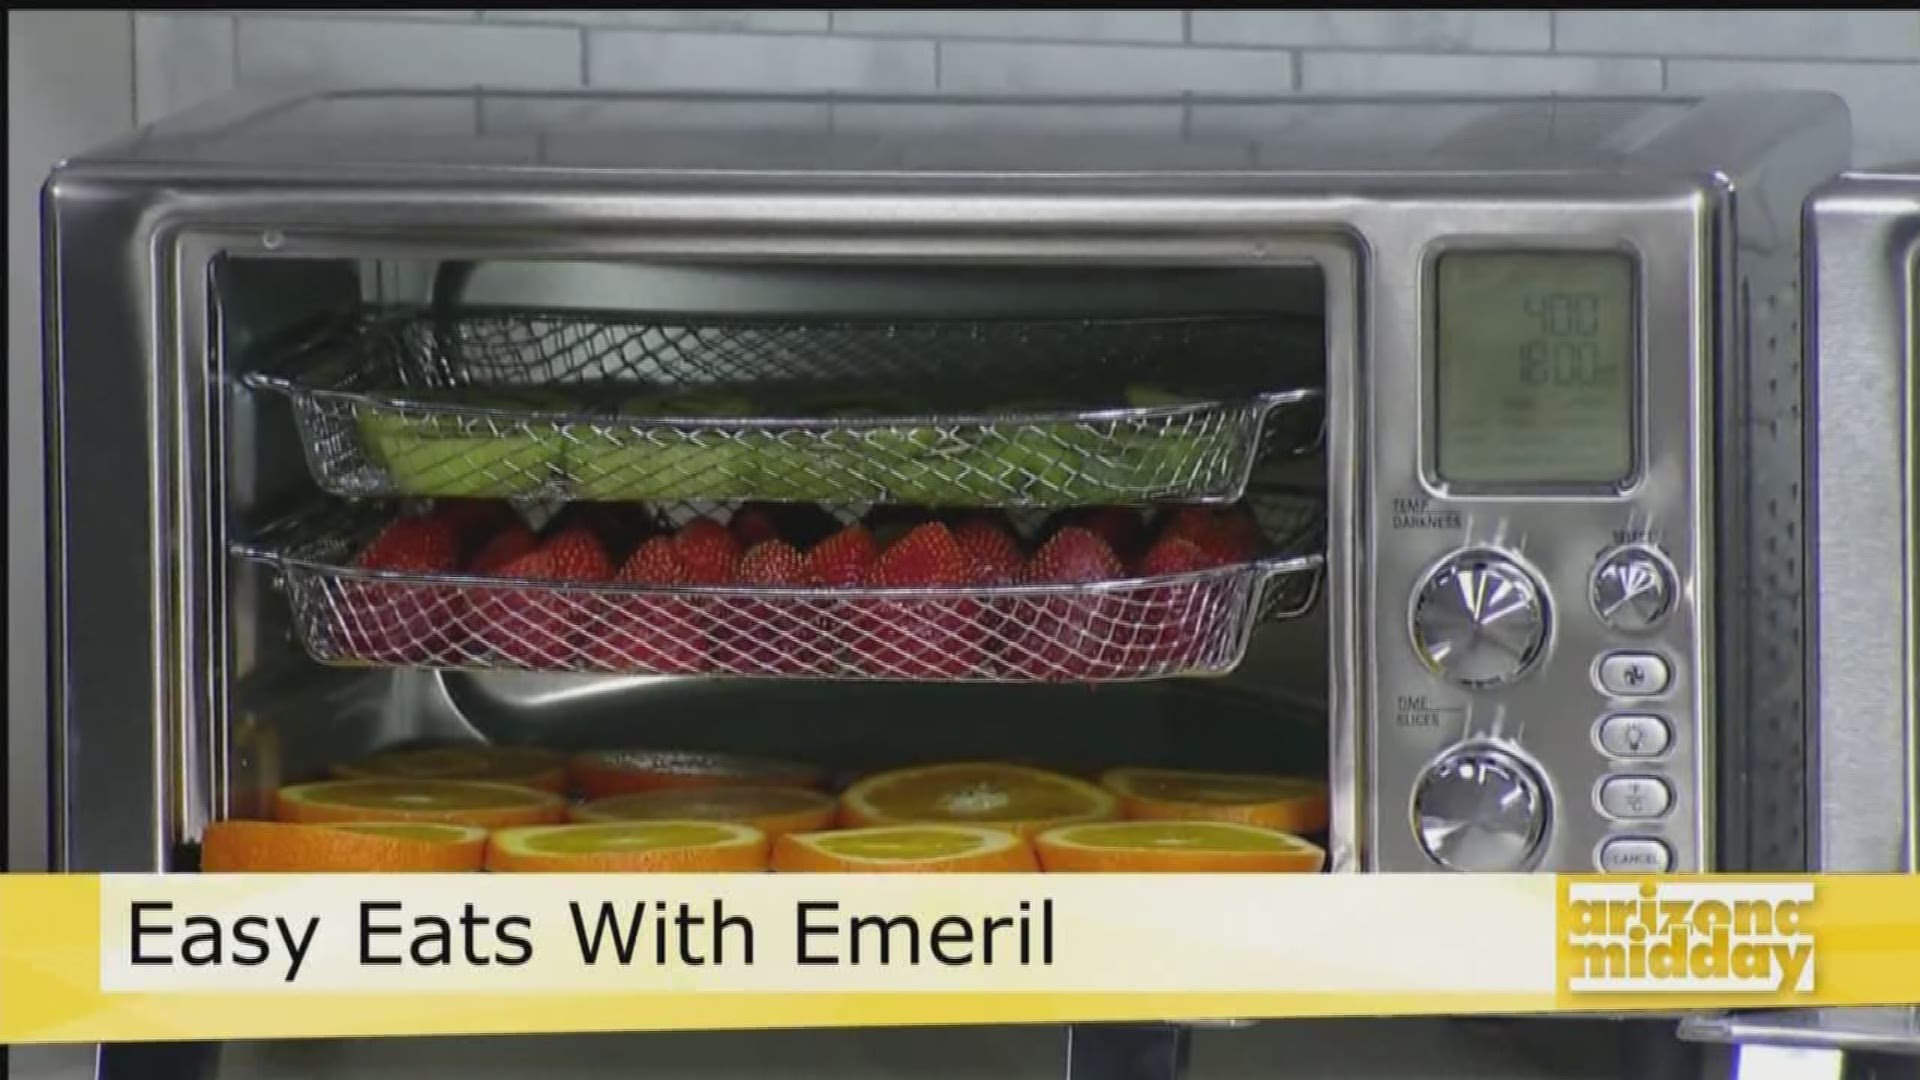 Cook Quick Meals with the Emeril Lagasse Power Airfryer 360